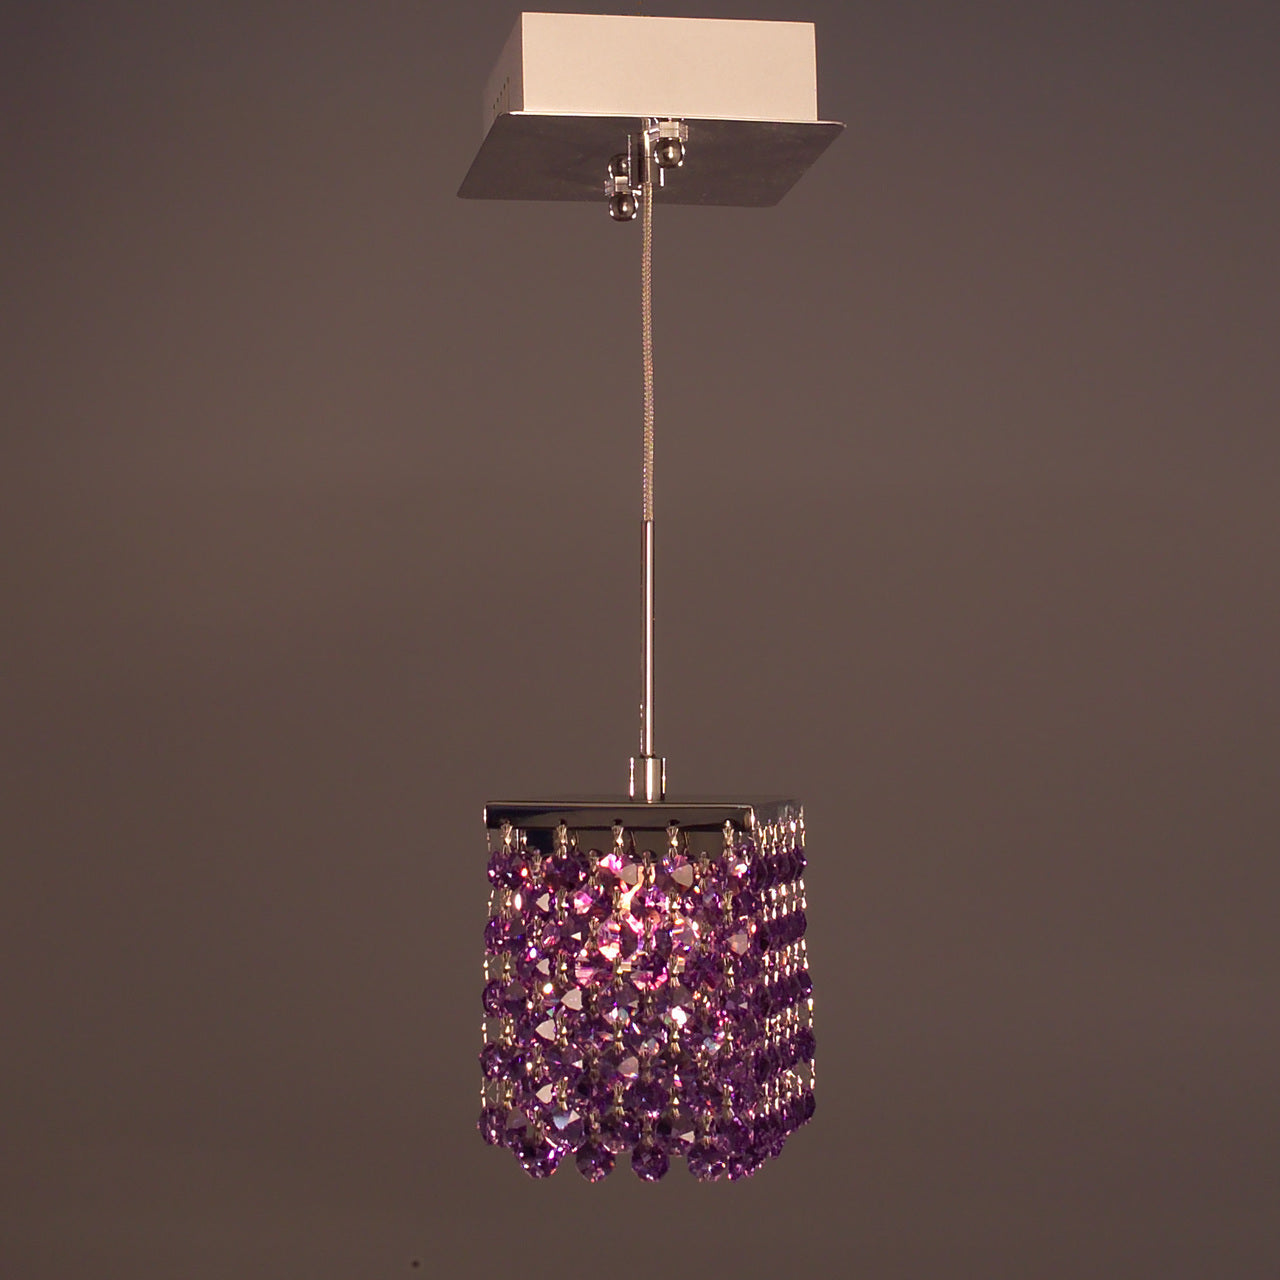 Classic Lighting 16101 VIO Bedazzle Crystal Pendant in Chrome